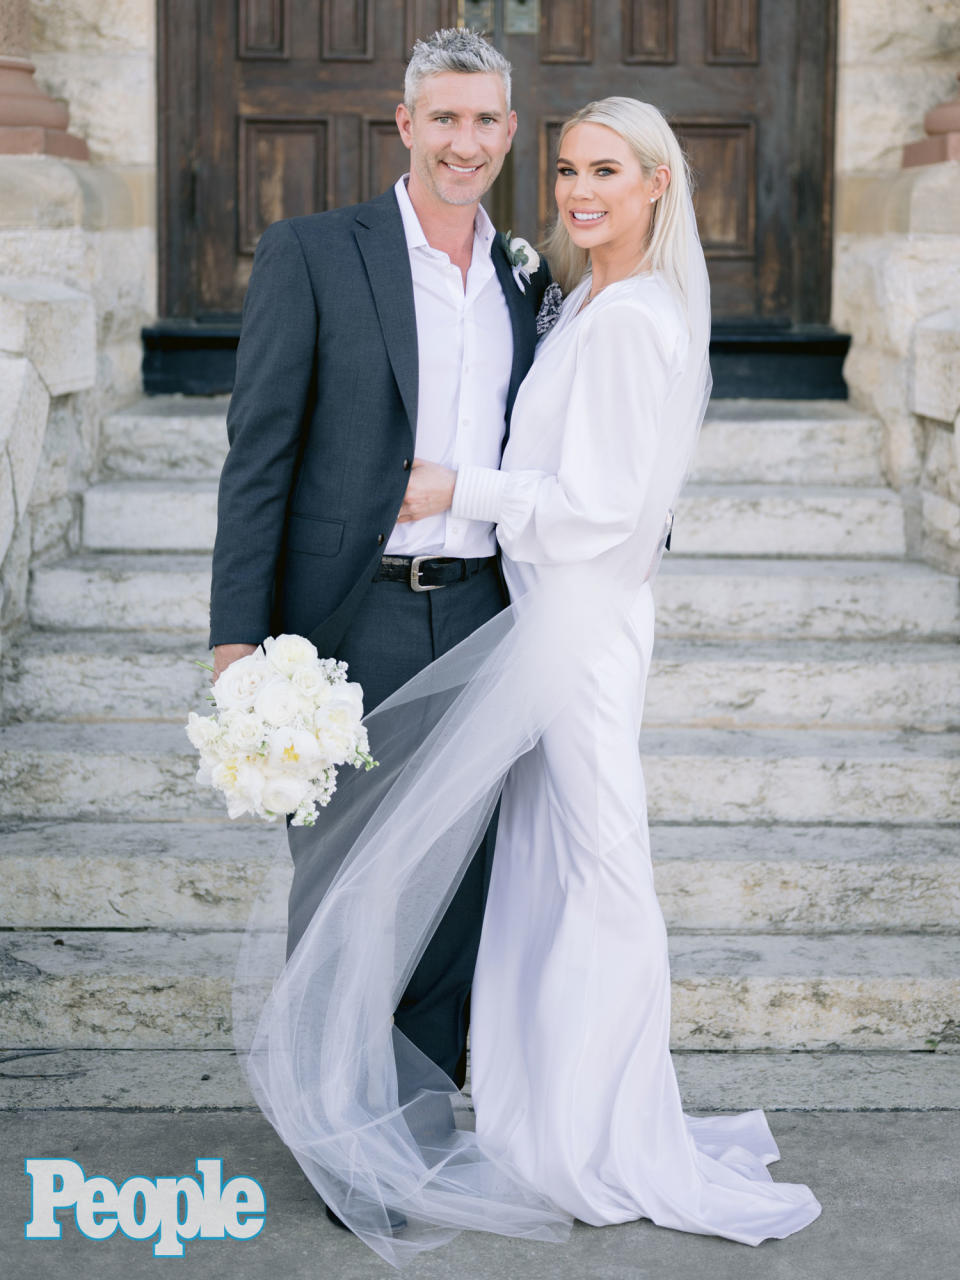 <p>Rachel Bradshaw–whose dad is former NFL star and Fox Sunday sports analyst Terry Bradshaw–married her "childhood friend" Chase Lybbert on March 25 in Denton, Texas. "Our families are so close. And solidifying that is so special, really, for all of us," the bride, 35, told PEOPLE. </p>  